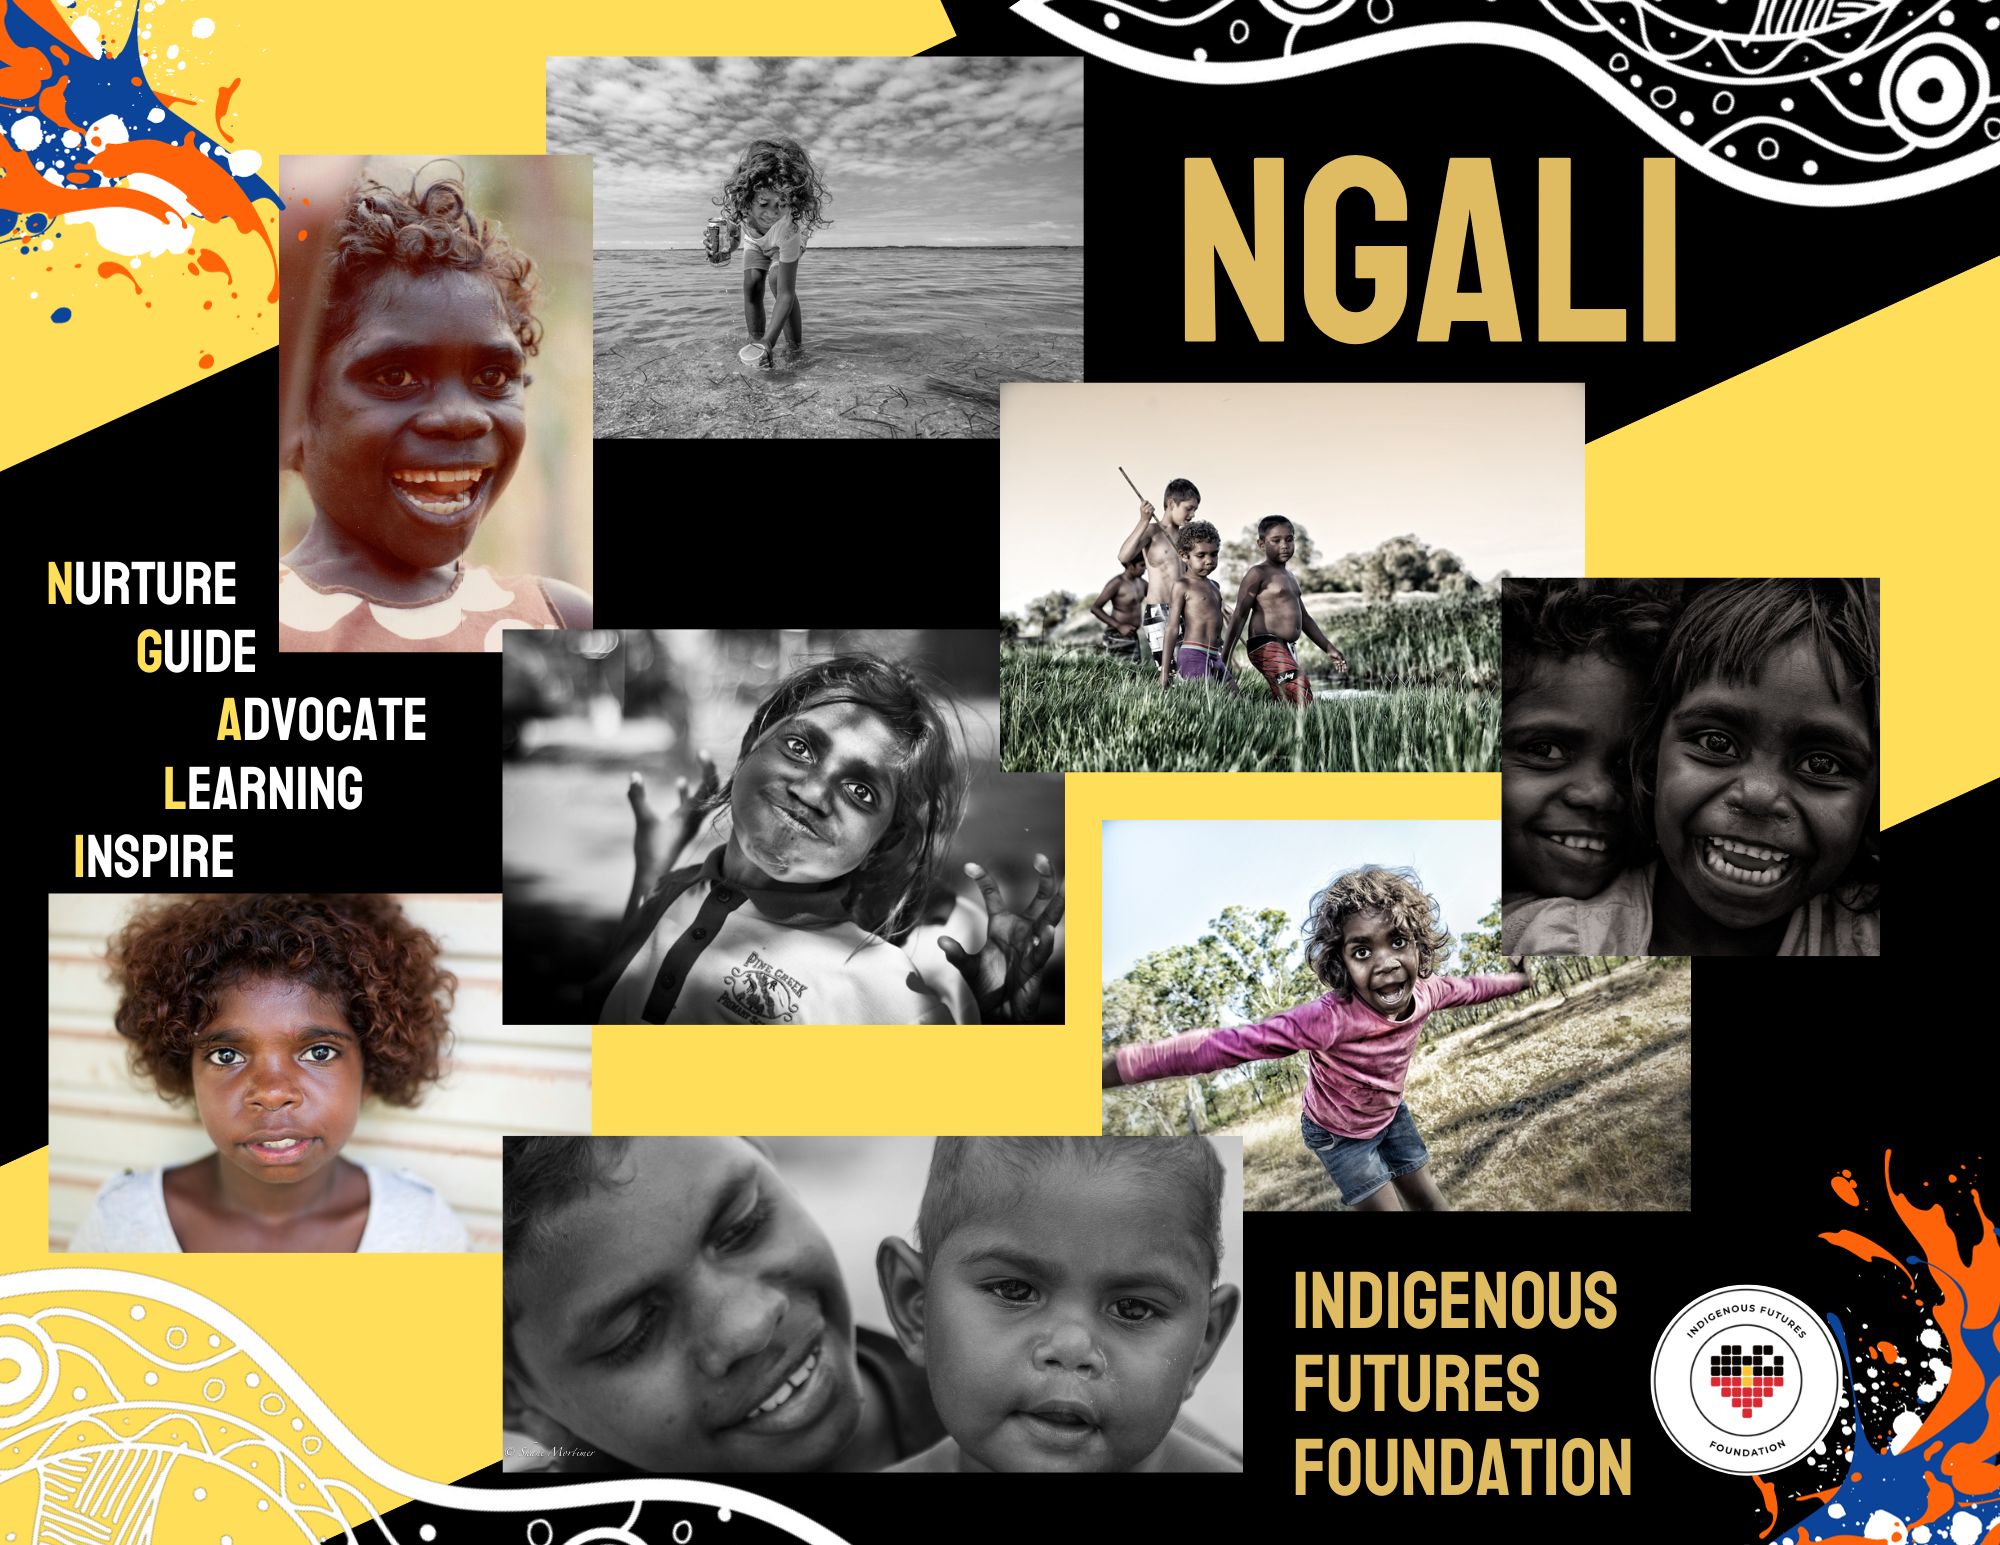 Ngali: Empowering young First Nations people in Cherbourg through a range of education, social and employment training